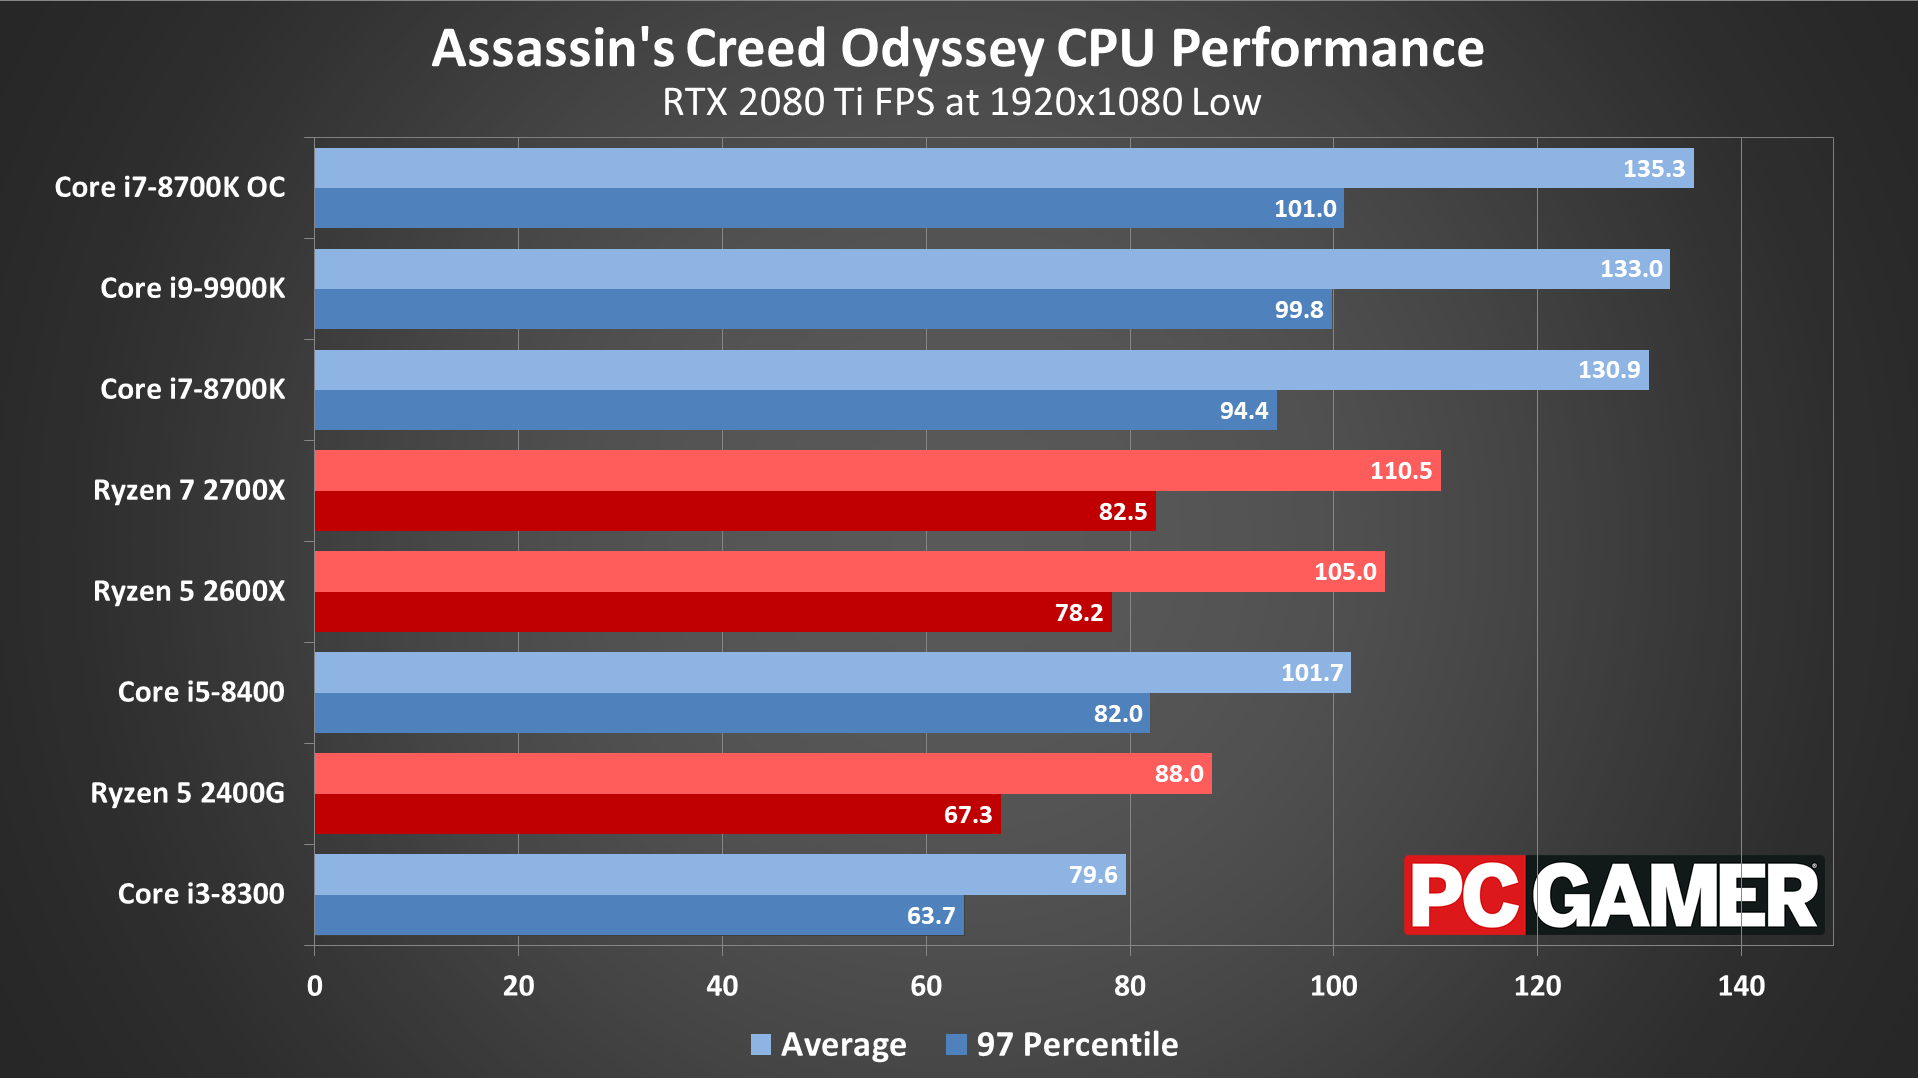 Why actually hitting 144fps is so hard in most games